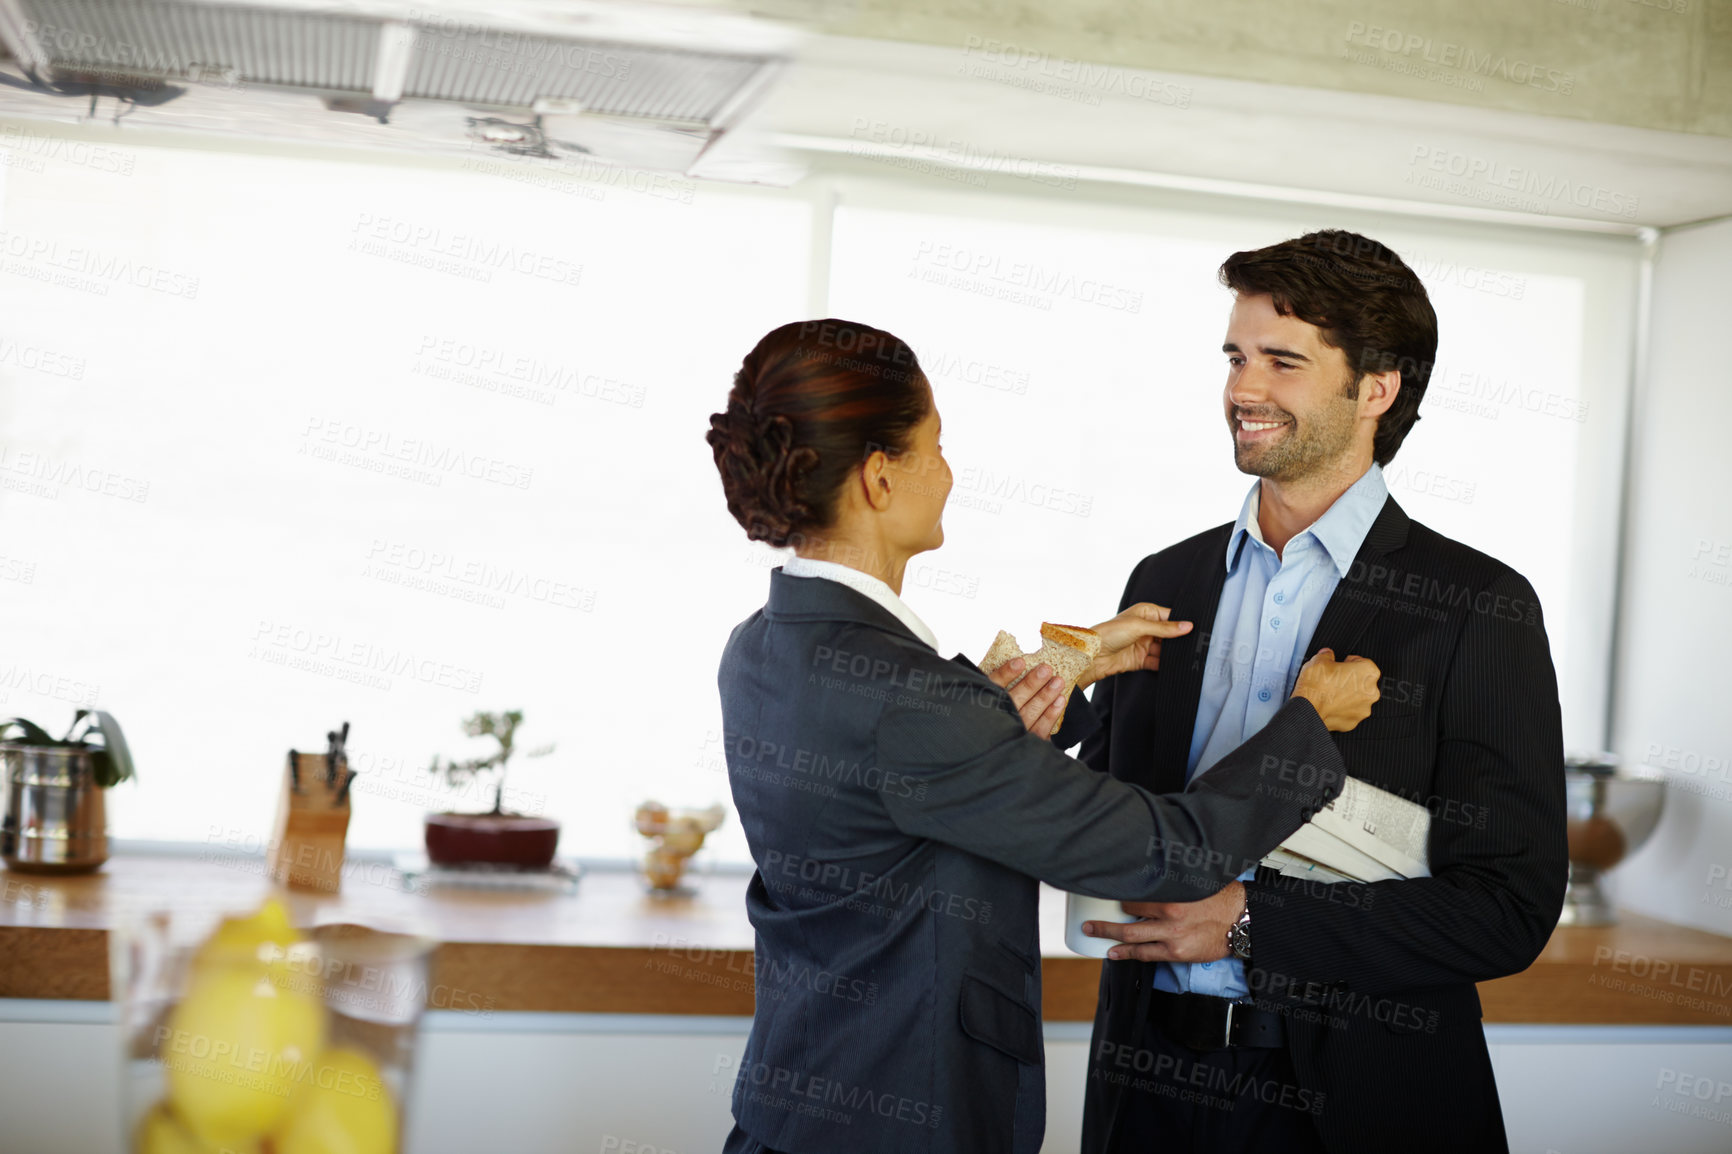 Buy stock photo Attractive woman adjusts her husbands jacket before he leaves for work